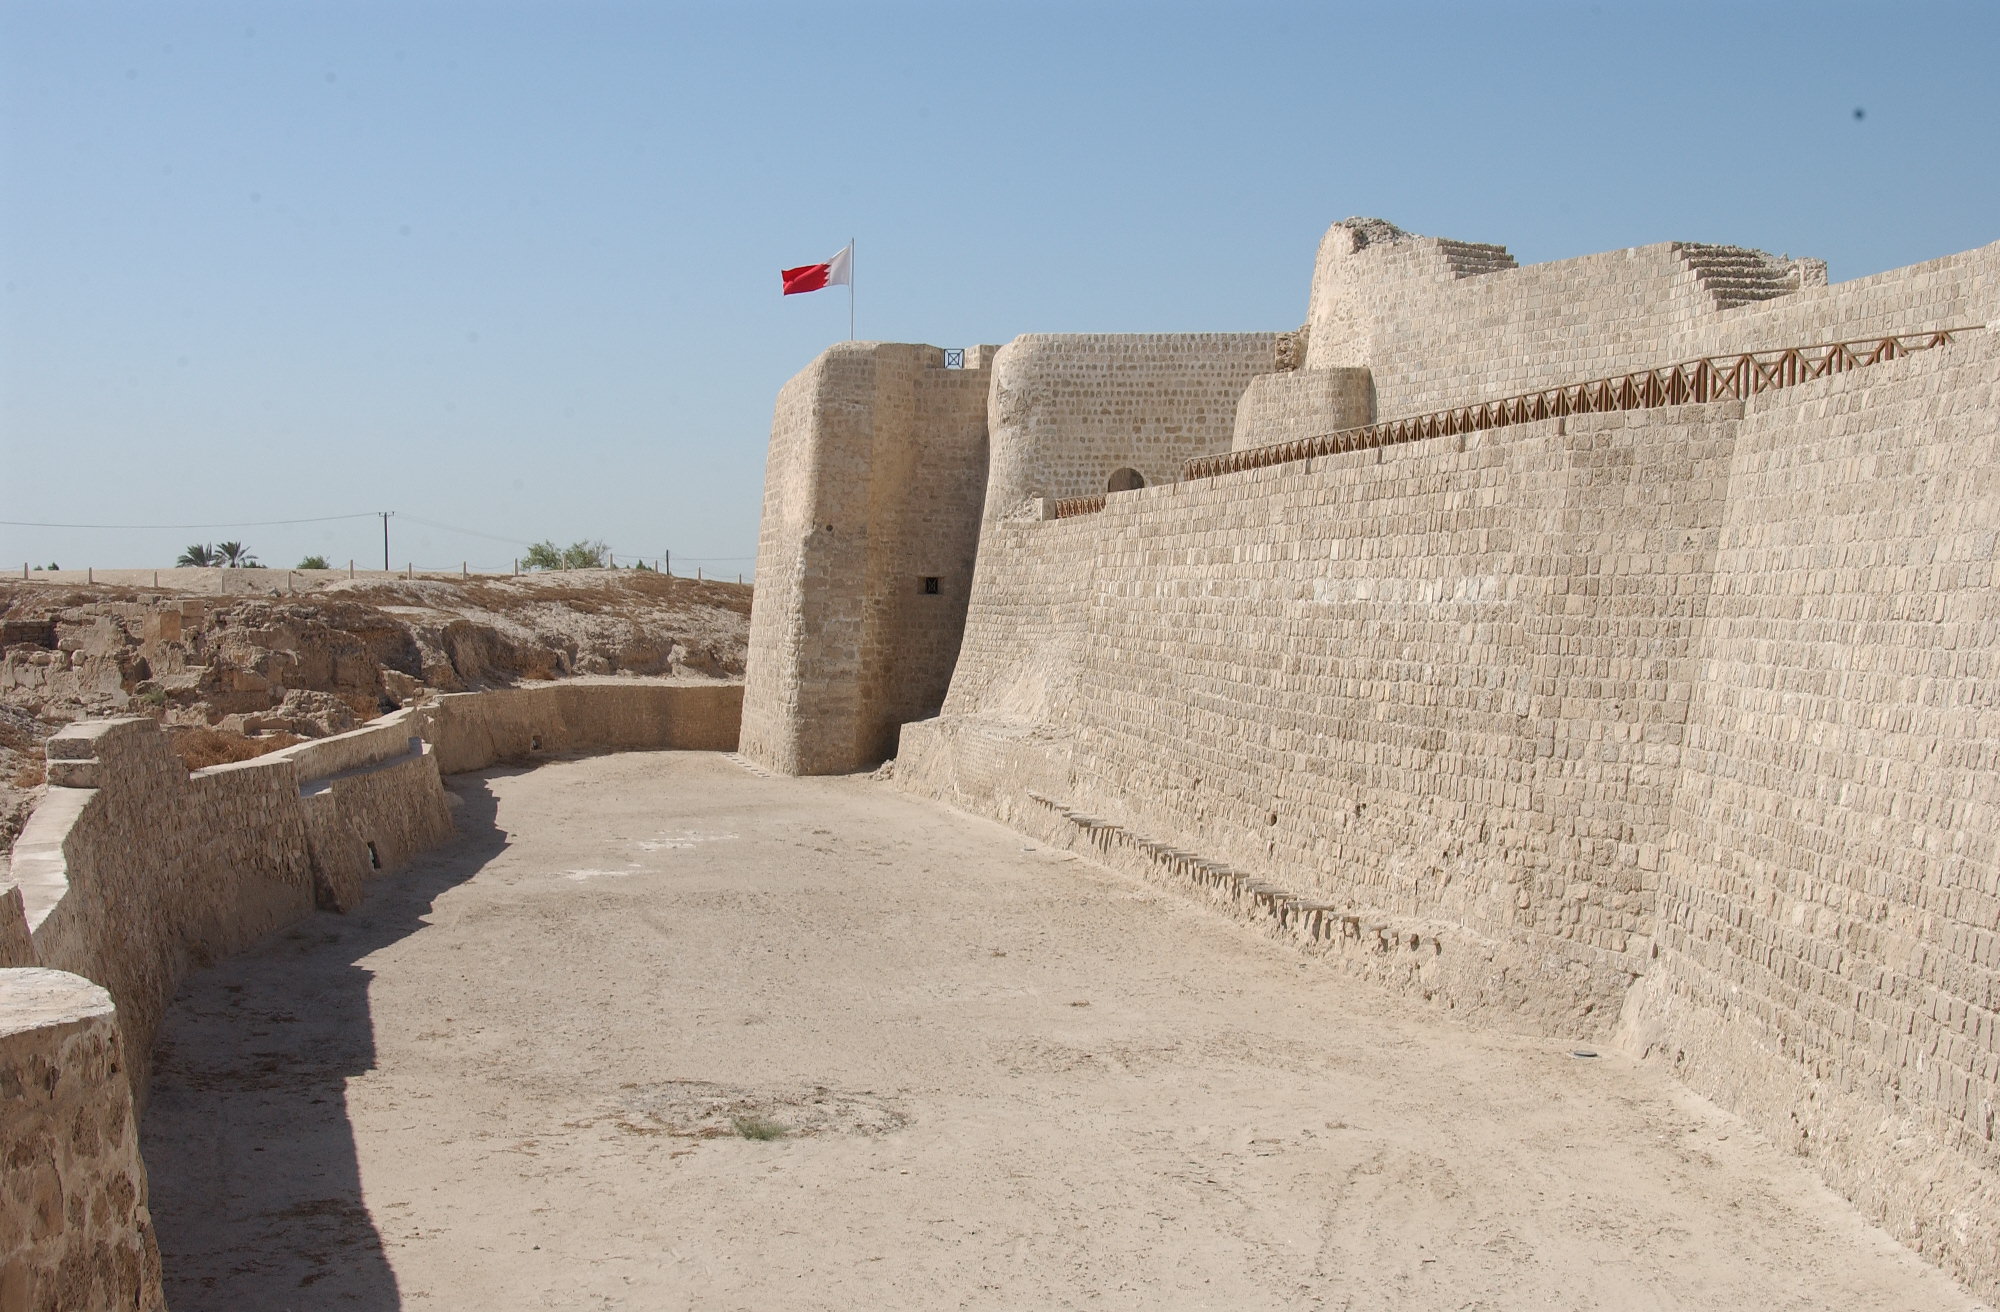 Qalat Al-Bahrain (Bahrain Fort), is the most important one in terms of historic and monumental significance